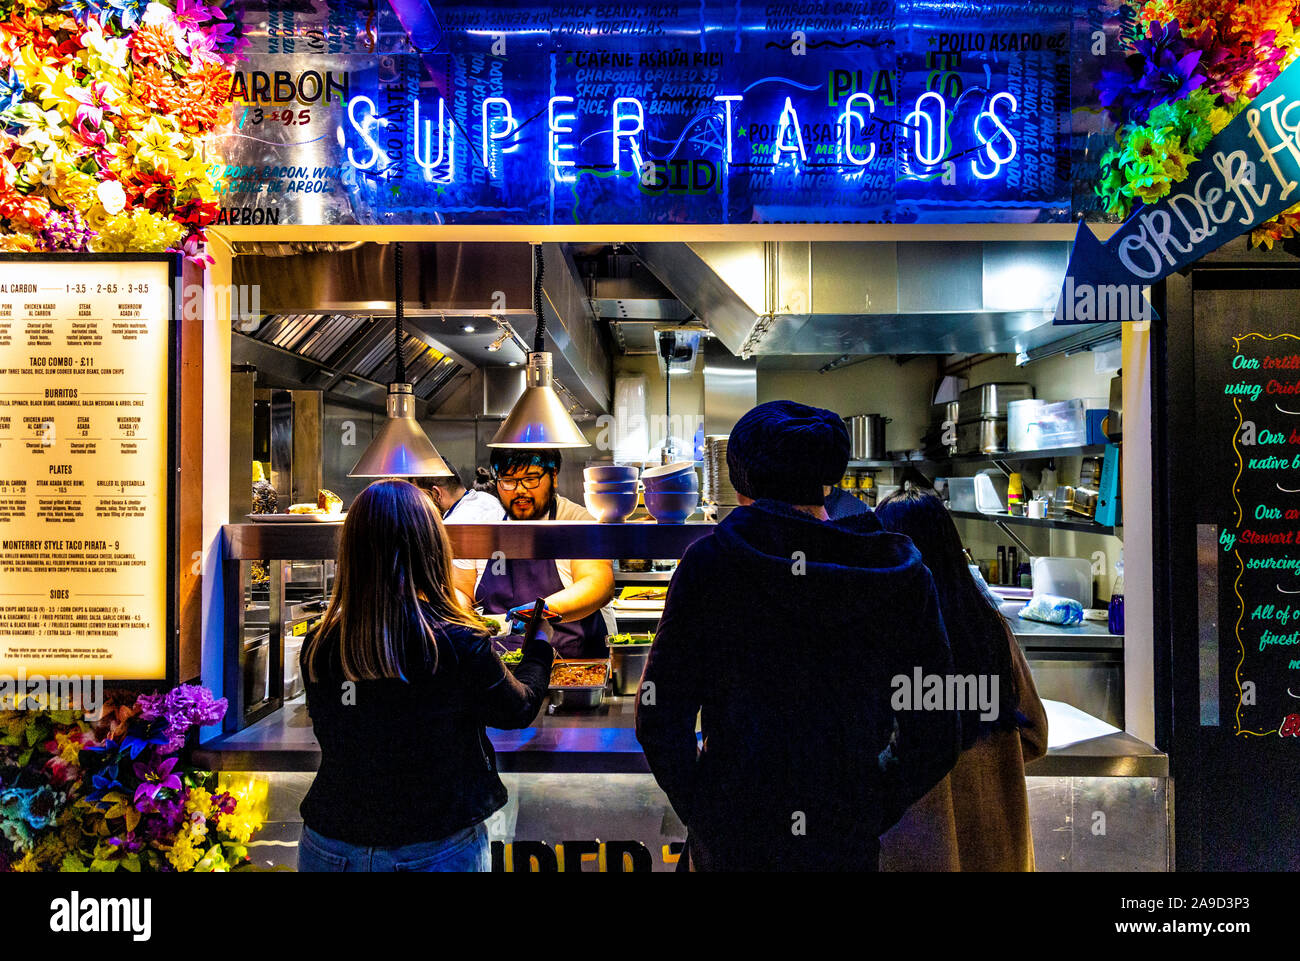 15th November 2019 - Opening of Market Hall West End, London, UK, people ordering food at the Super Tacos stall Stock Photo